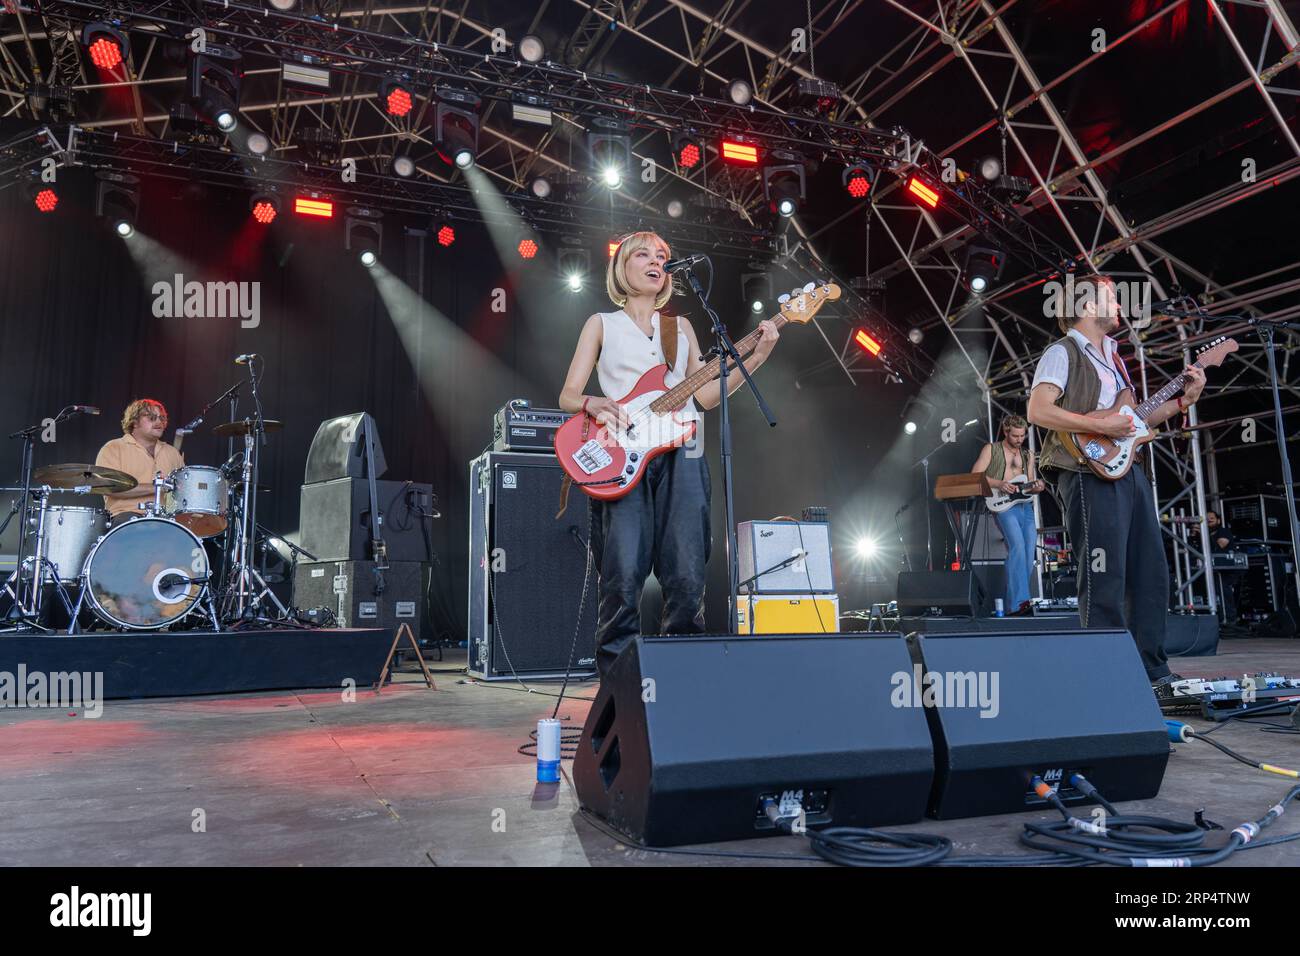 Dorset, UK. Sunday, 3 September, 2023. Divorce performing at the 2023 edition of the End of the Road festival at Larmer Tree Gardens in Dorset. Photo date: Sunday, September 3, 2023. Photo credit should read: Richard Gray/Alamy Live News Stock Photo